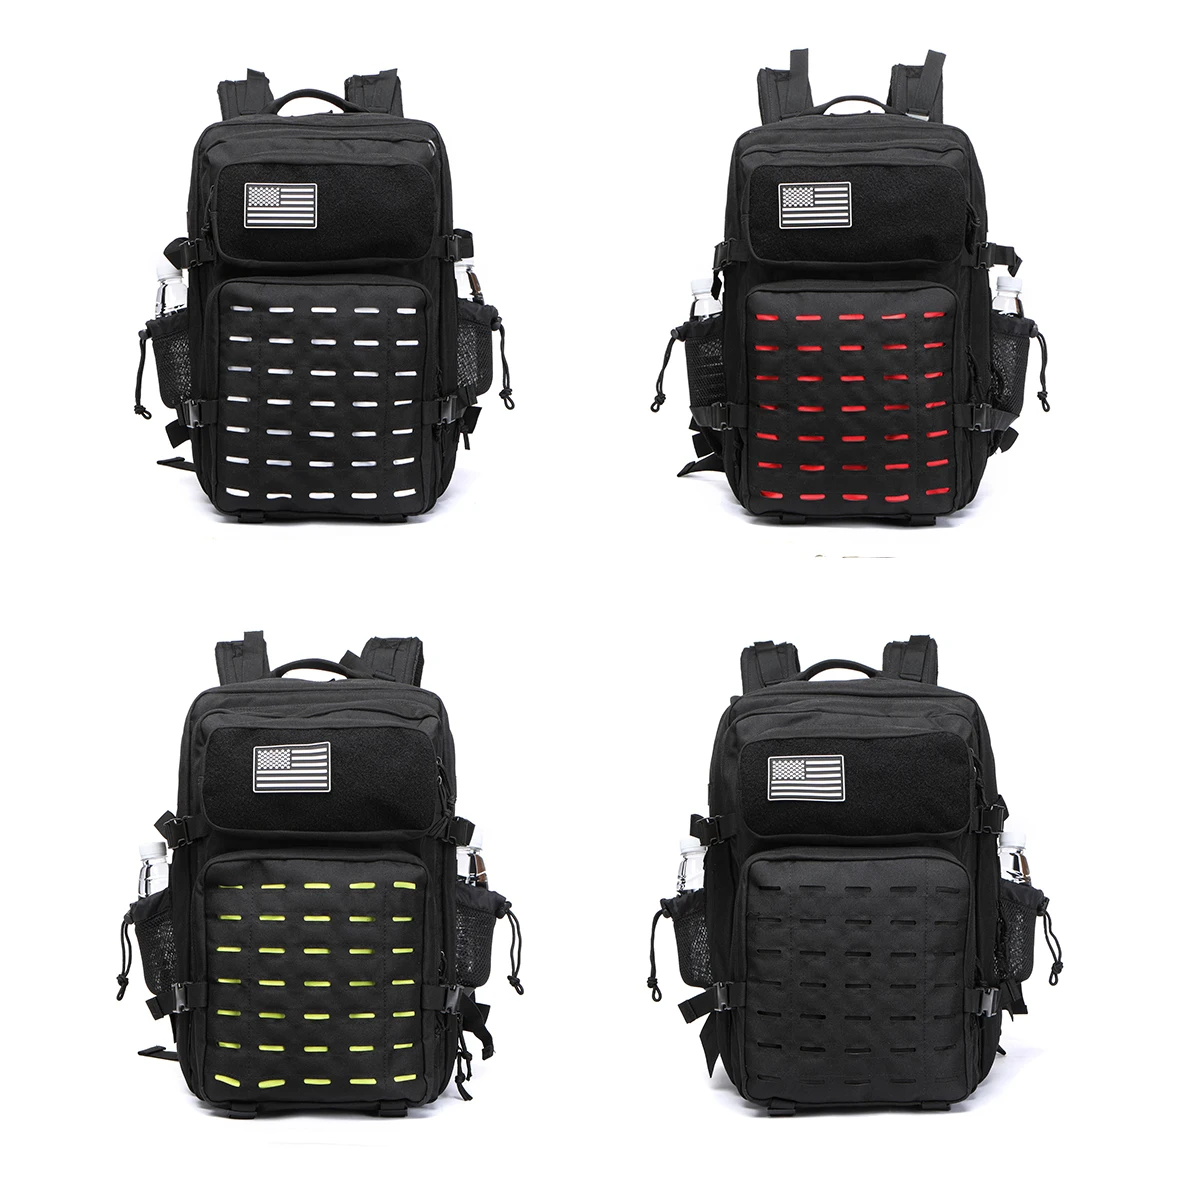 https://ae01.alicdn.com/kf/Saedebf1a1a5545f0a5368a5af0a67209s/50L-Waterproof-Outdoor-Tactical-Rucksack-Backpack-for-Trekking-Fishing-Hunting-GYM-Approved-as-a-Carry-On.jpg